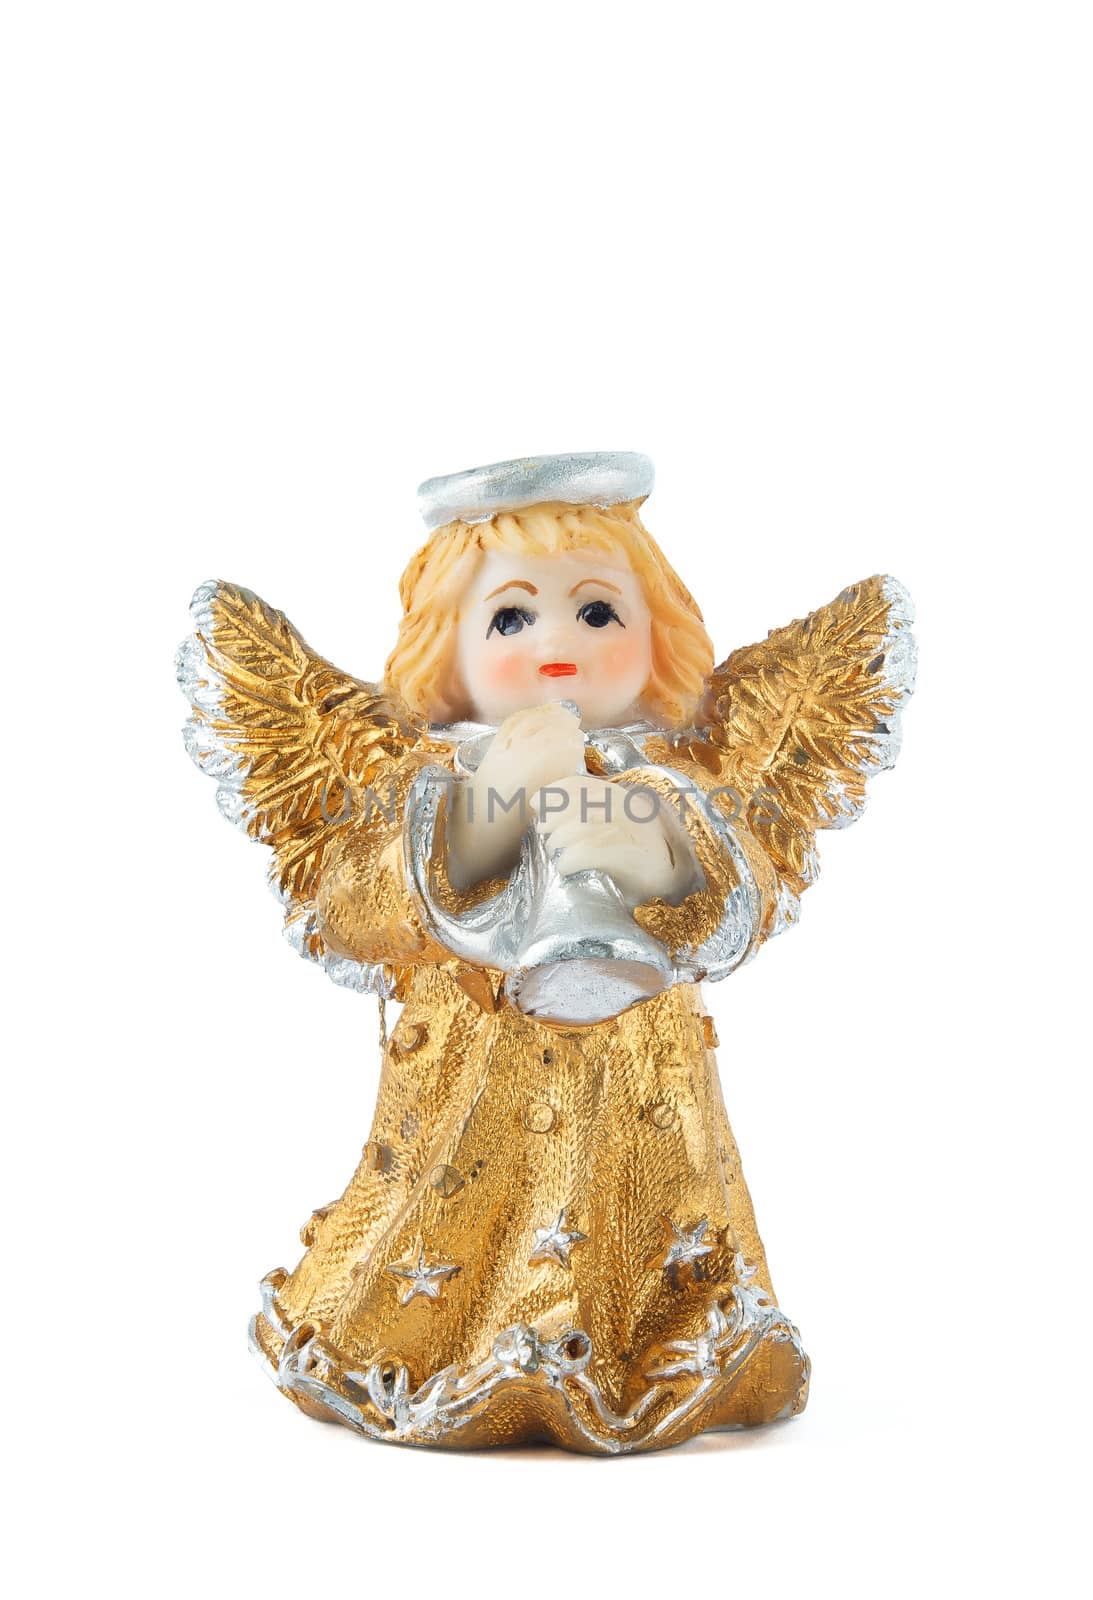 A little miniature statue of a colorful angel with wings and halo, playing the trumpet